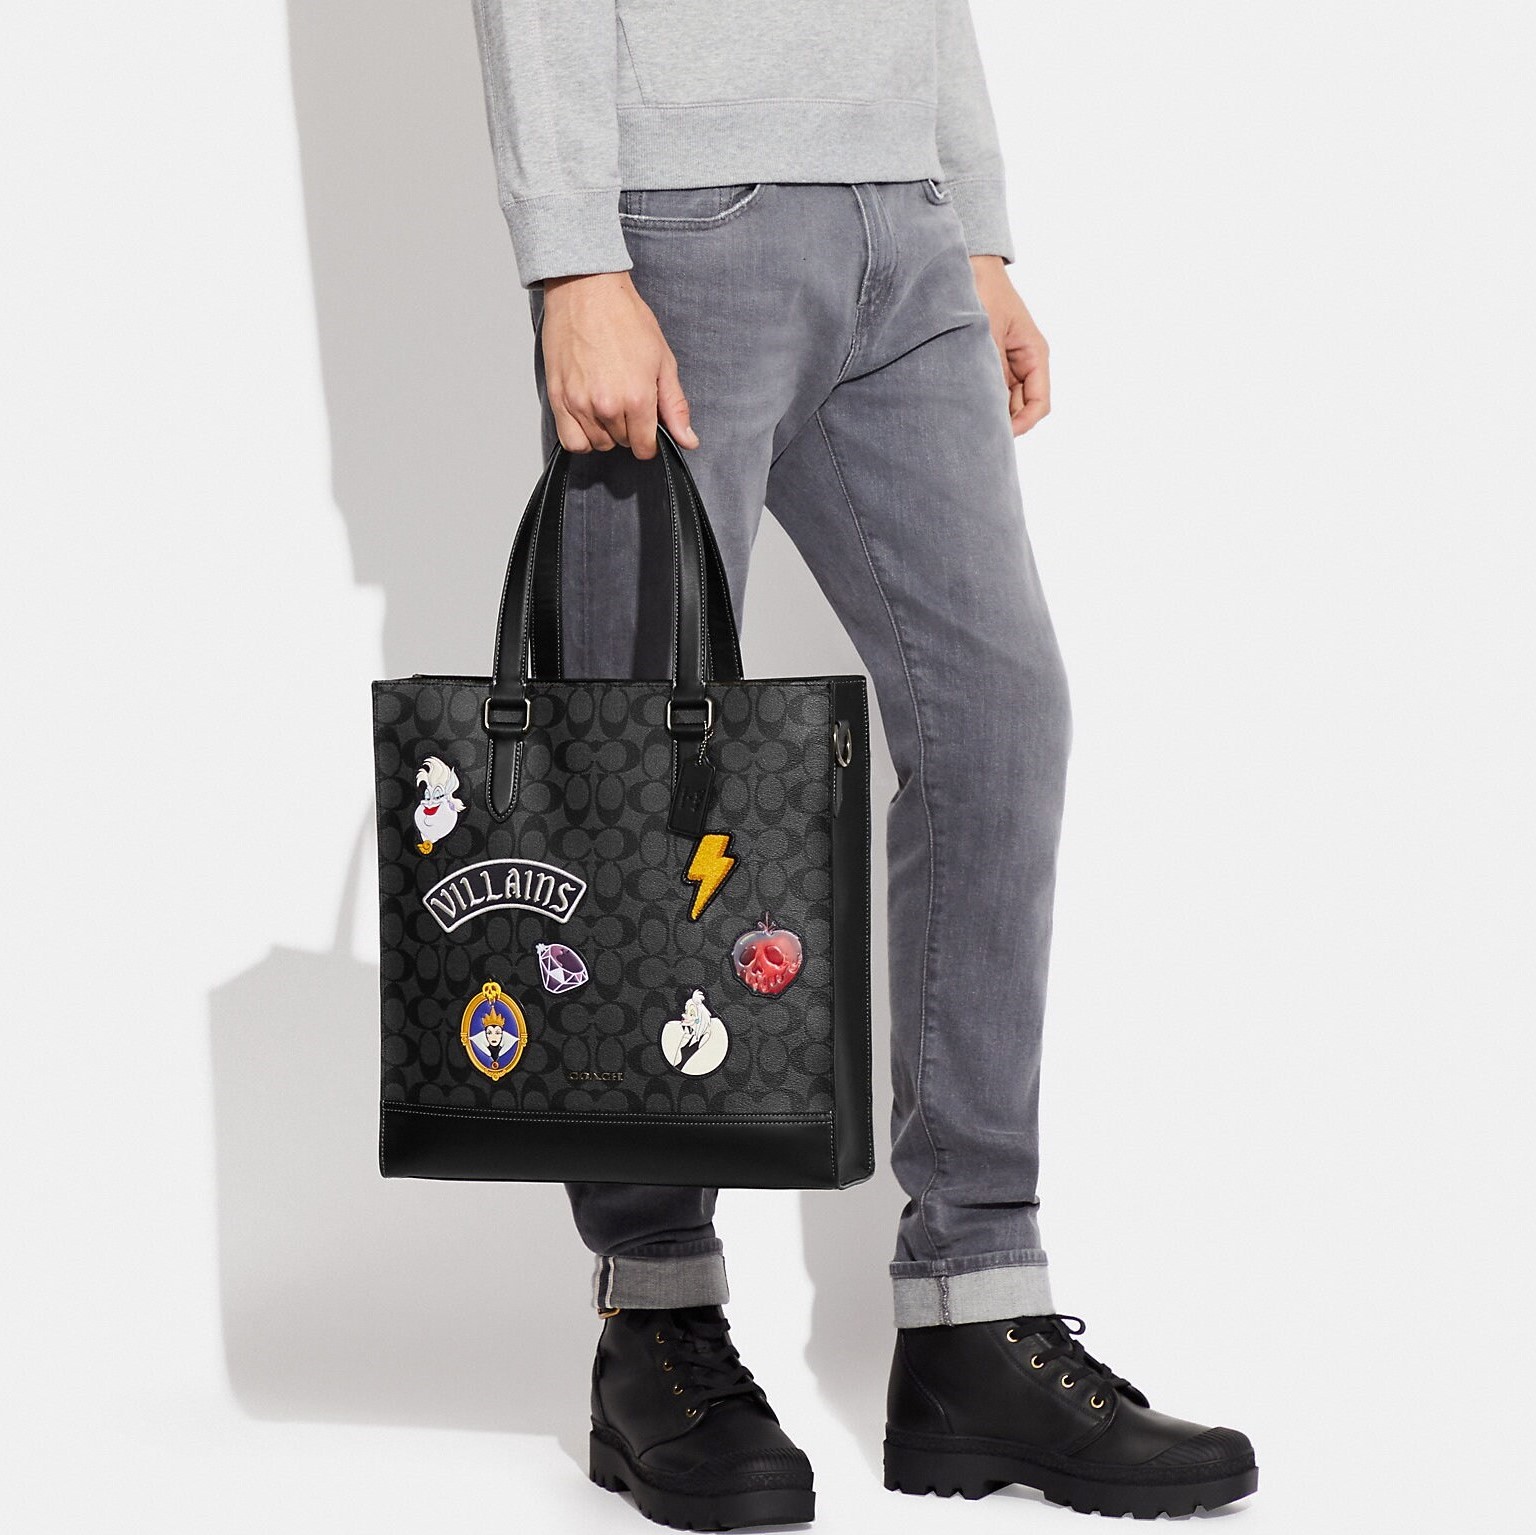 Coach releases Keith Haring x Mickey Mouse collection: how to buy them